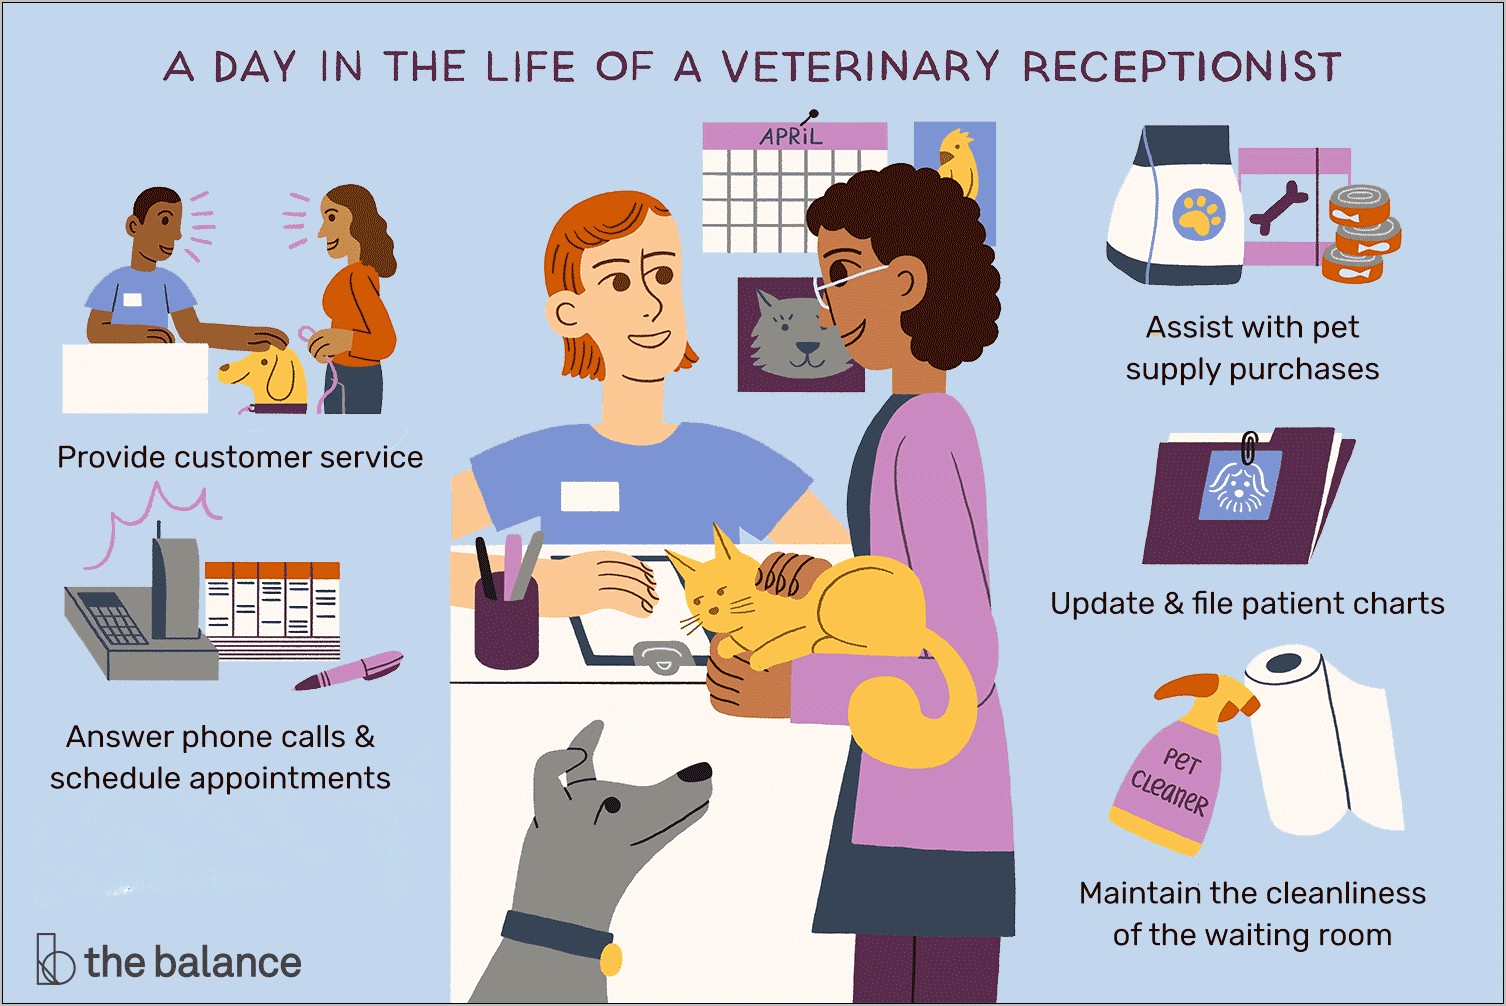 Example Of A Resume May For Veterinary Assistant